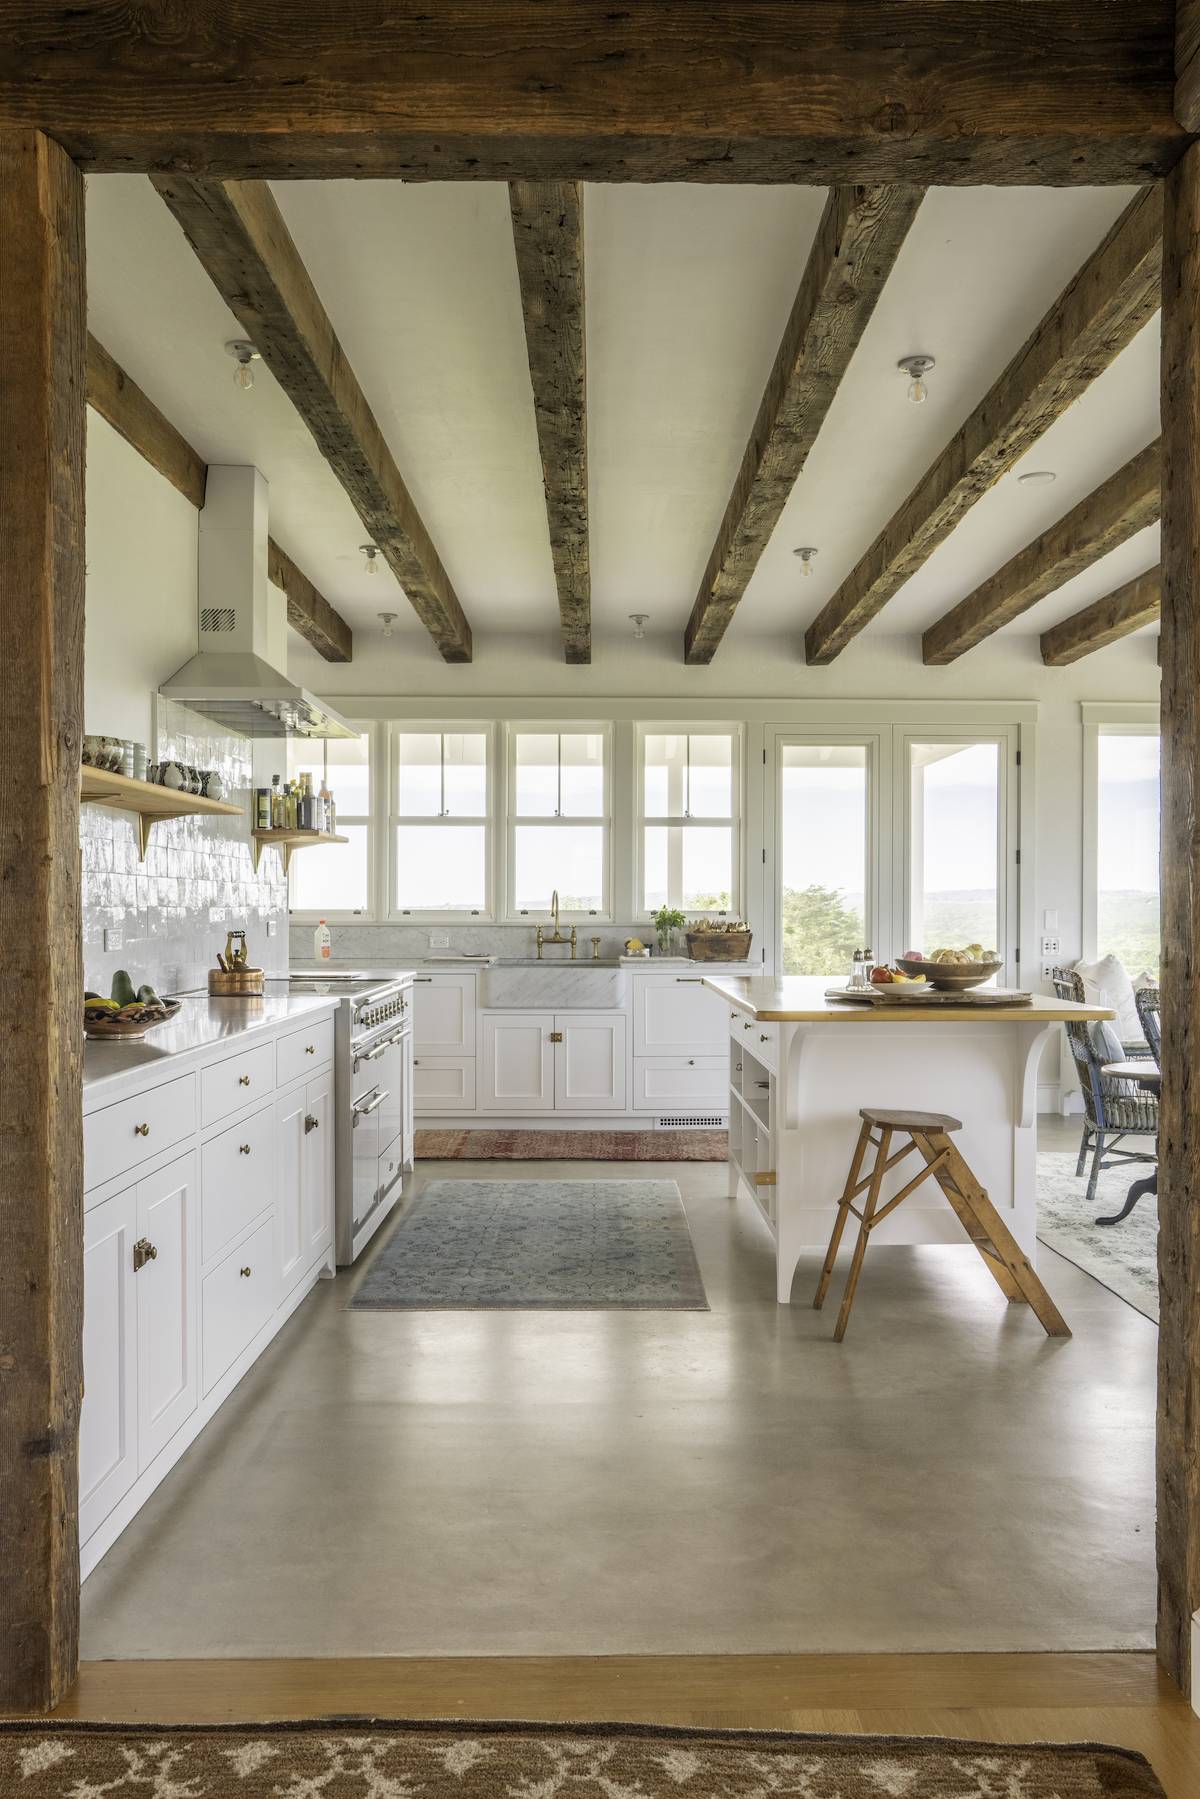 A kitchen with wooden beams